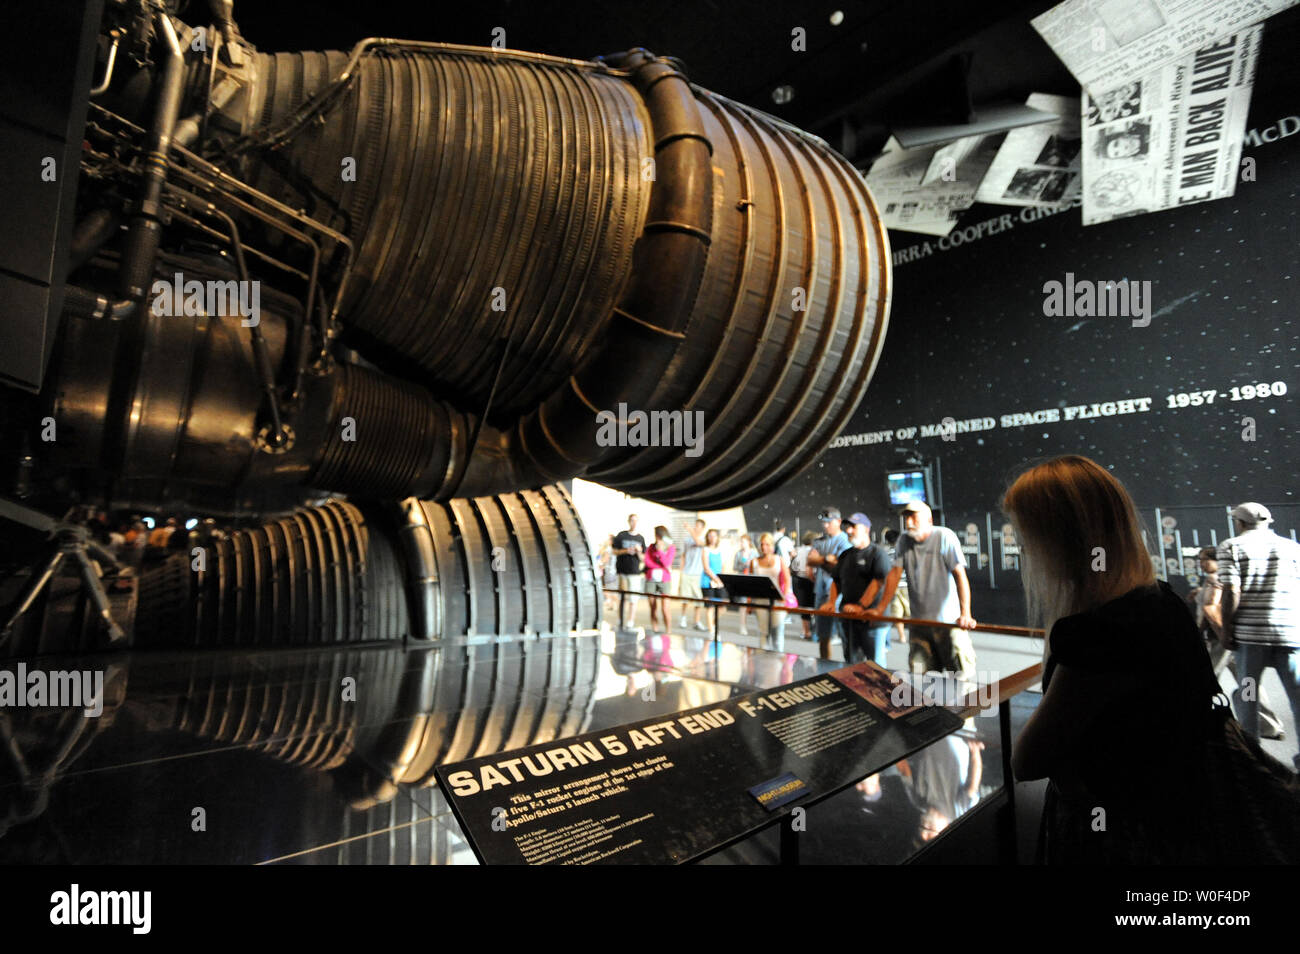 Tourists look at the giant aft burners of the Saturn V rocket at the Smithsonian Air and Space Museum's 'Apollo to the Moon' exhibit on July 20, 2009 in Washington, DC.  Five giant first-stage engines propelled the Saturn V and Apollo missions into space.   Today is the 40th anniversary of astronaut Neil Armstrong's first walk on the moon via Apollo 11, on July 20, 1969.  The Apollo 11 crew was Armstrong, Buzz Aldrin and Michael Collins.   (UPI Photo/Pat Benic) Stock Photo